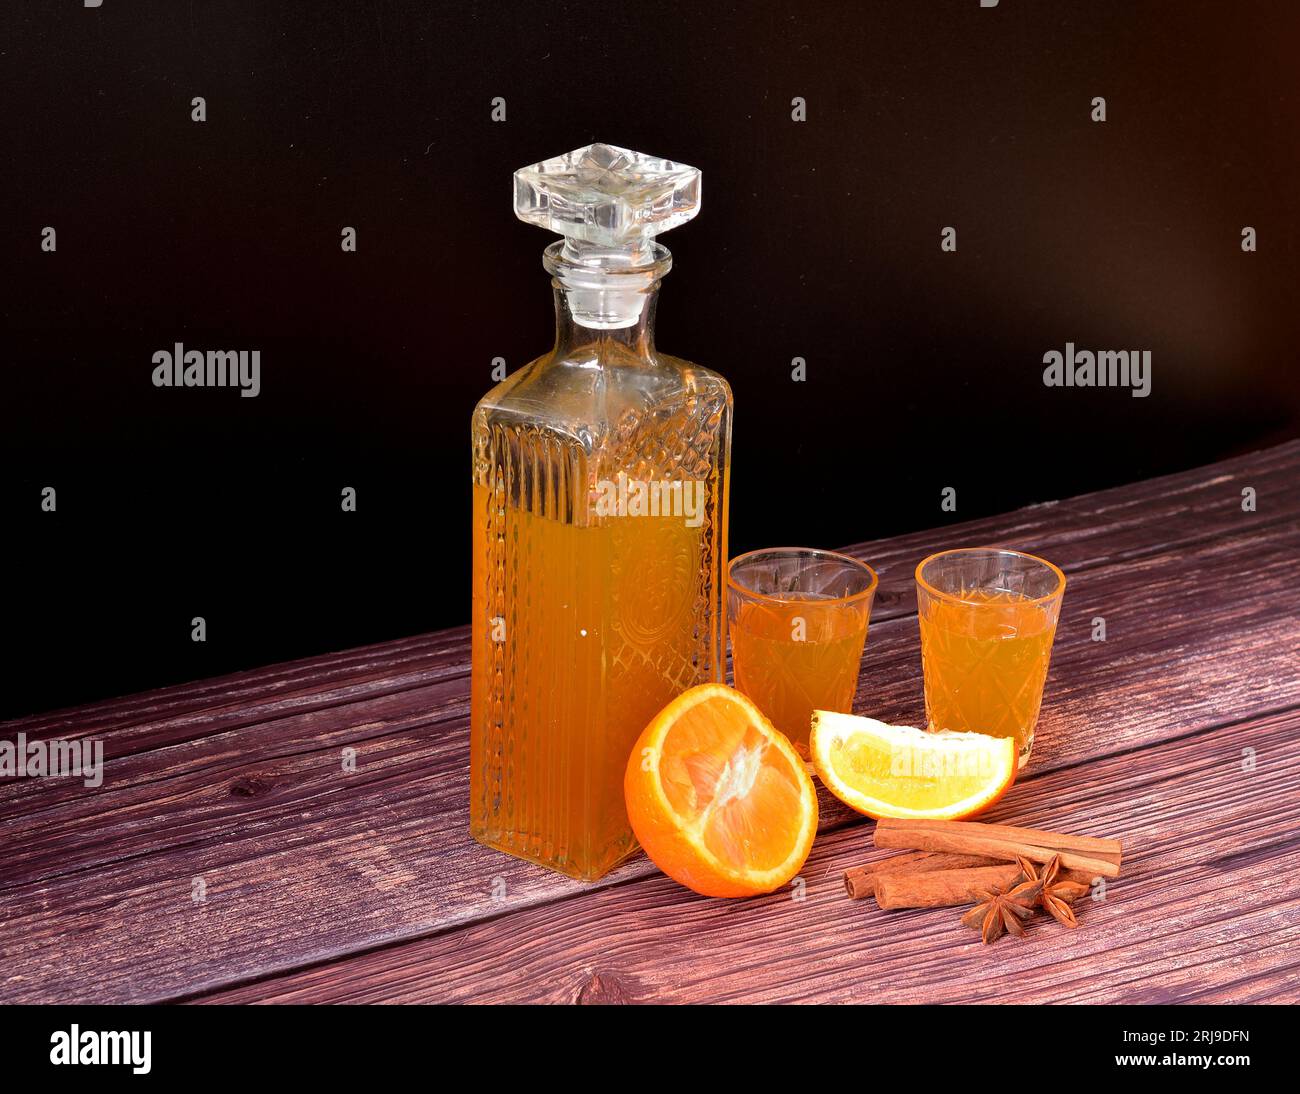 Orange liqueur on a dark wooden table, a bottle and two glasses with homemade alcohol, cinnamon and anise. Close-up. Stock Photo